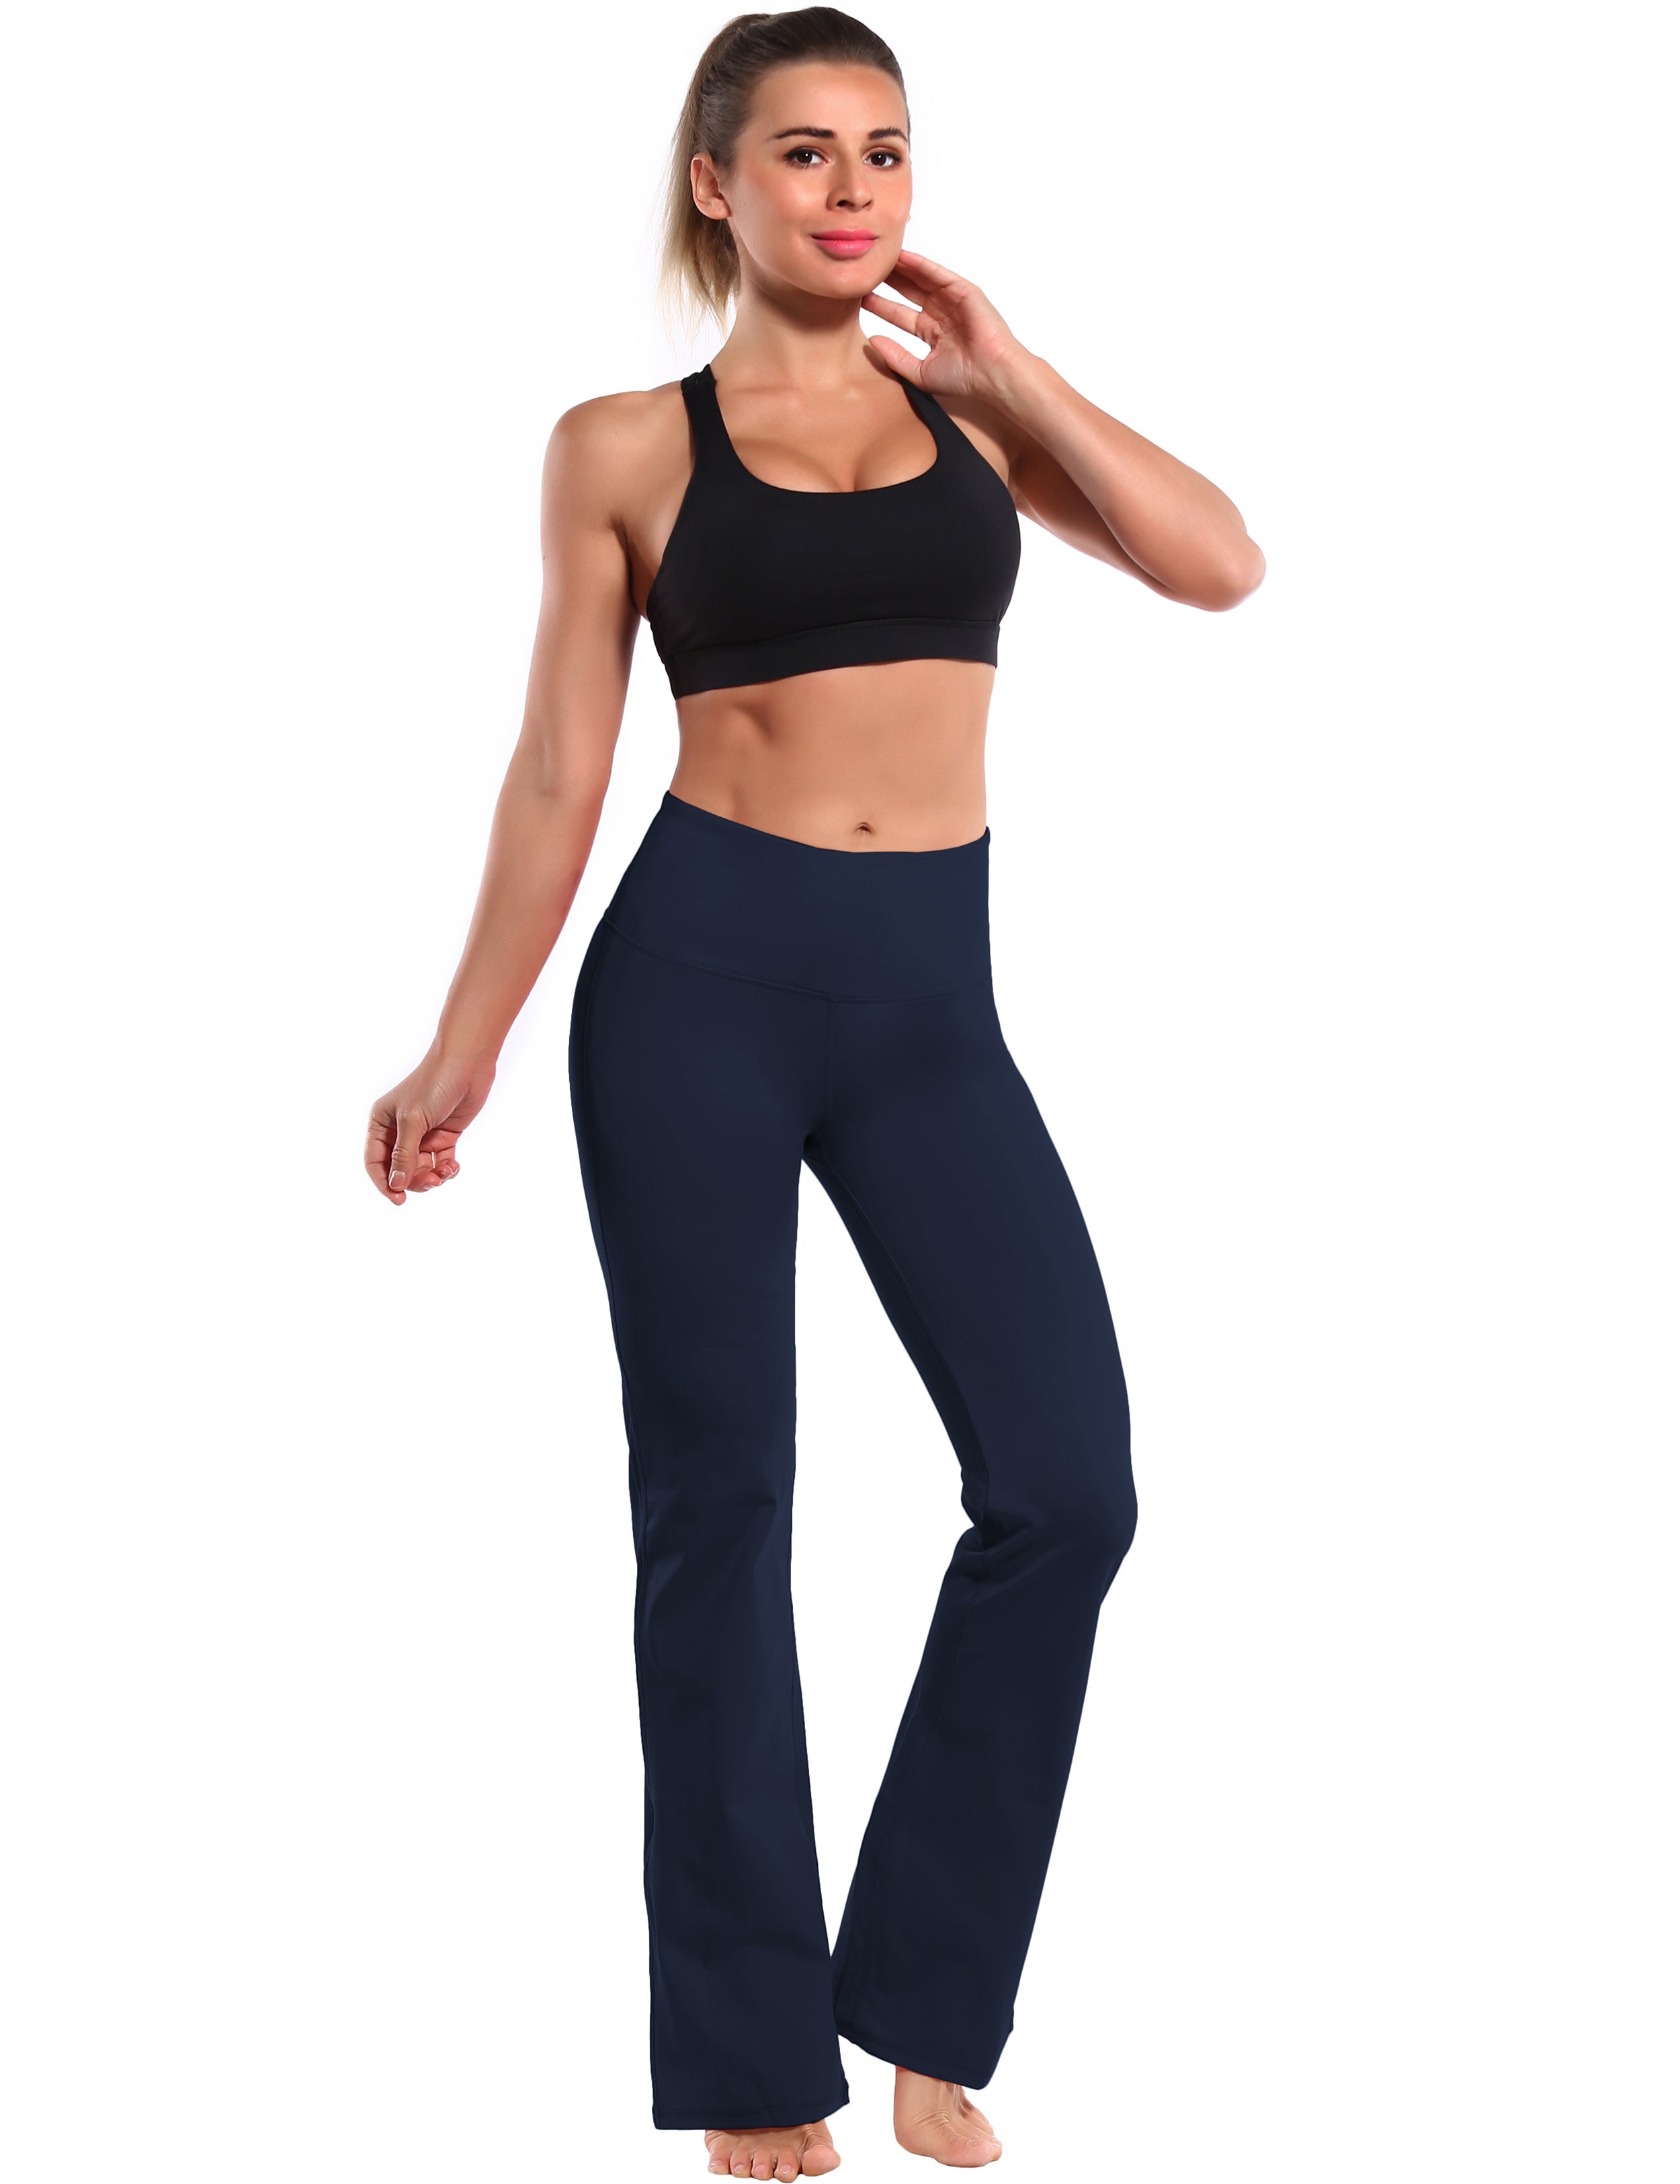 High Waist Bootcut Leggings Darknavy 75%Nylon/25%Spandex Fabric doesn't attract lint easily 4-way stretch No see-through Moisture-wicking Tummy control Inner pocket Five lengths